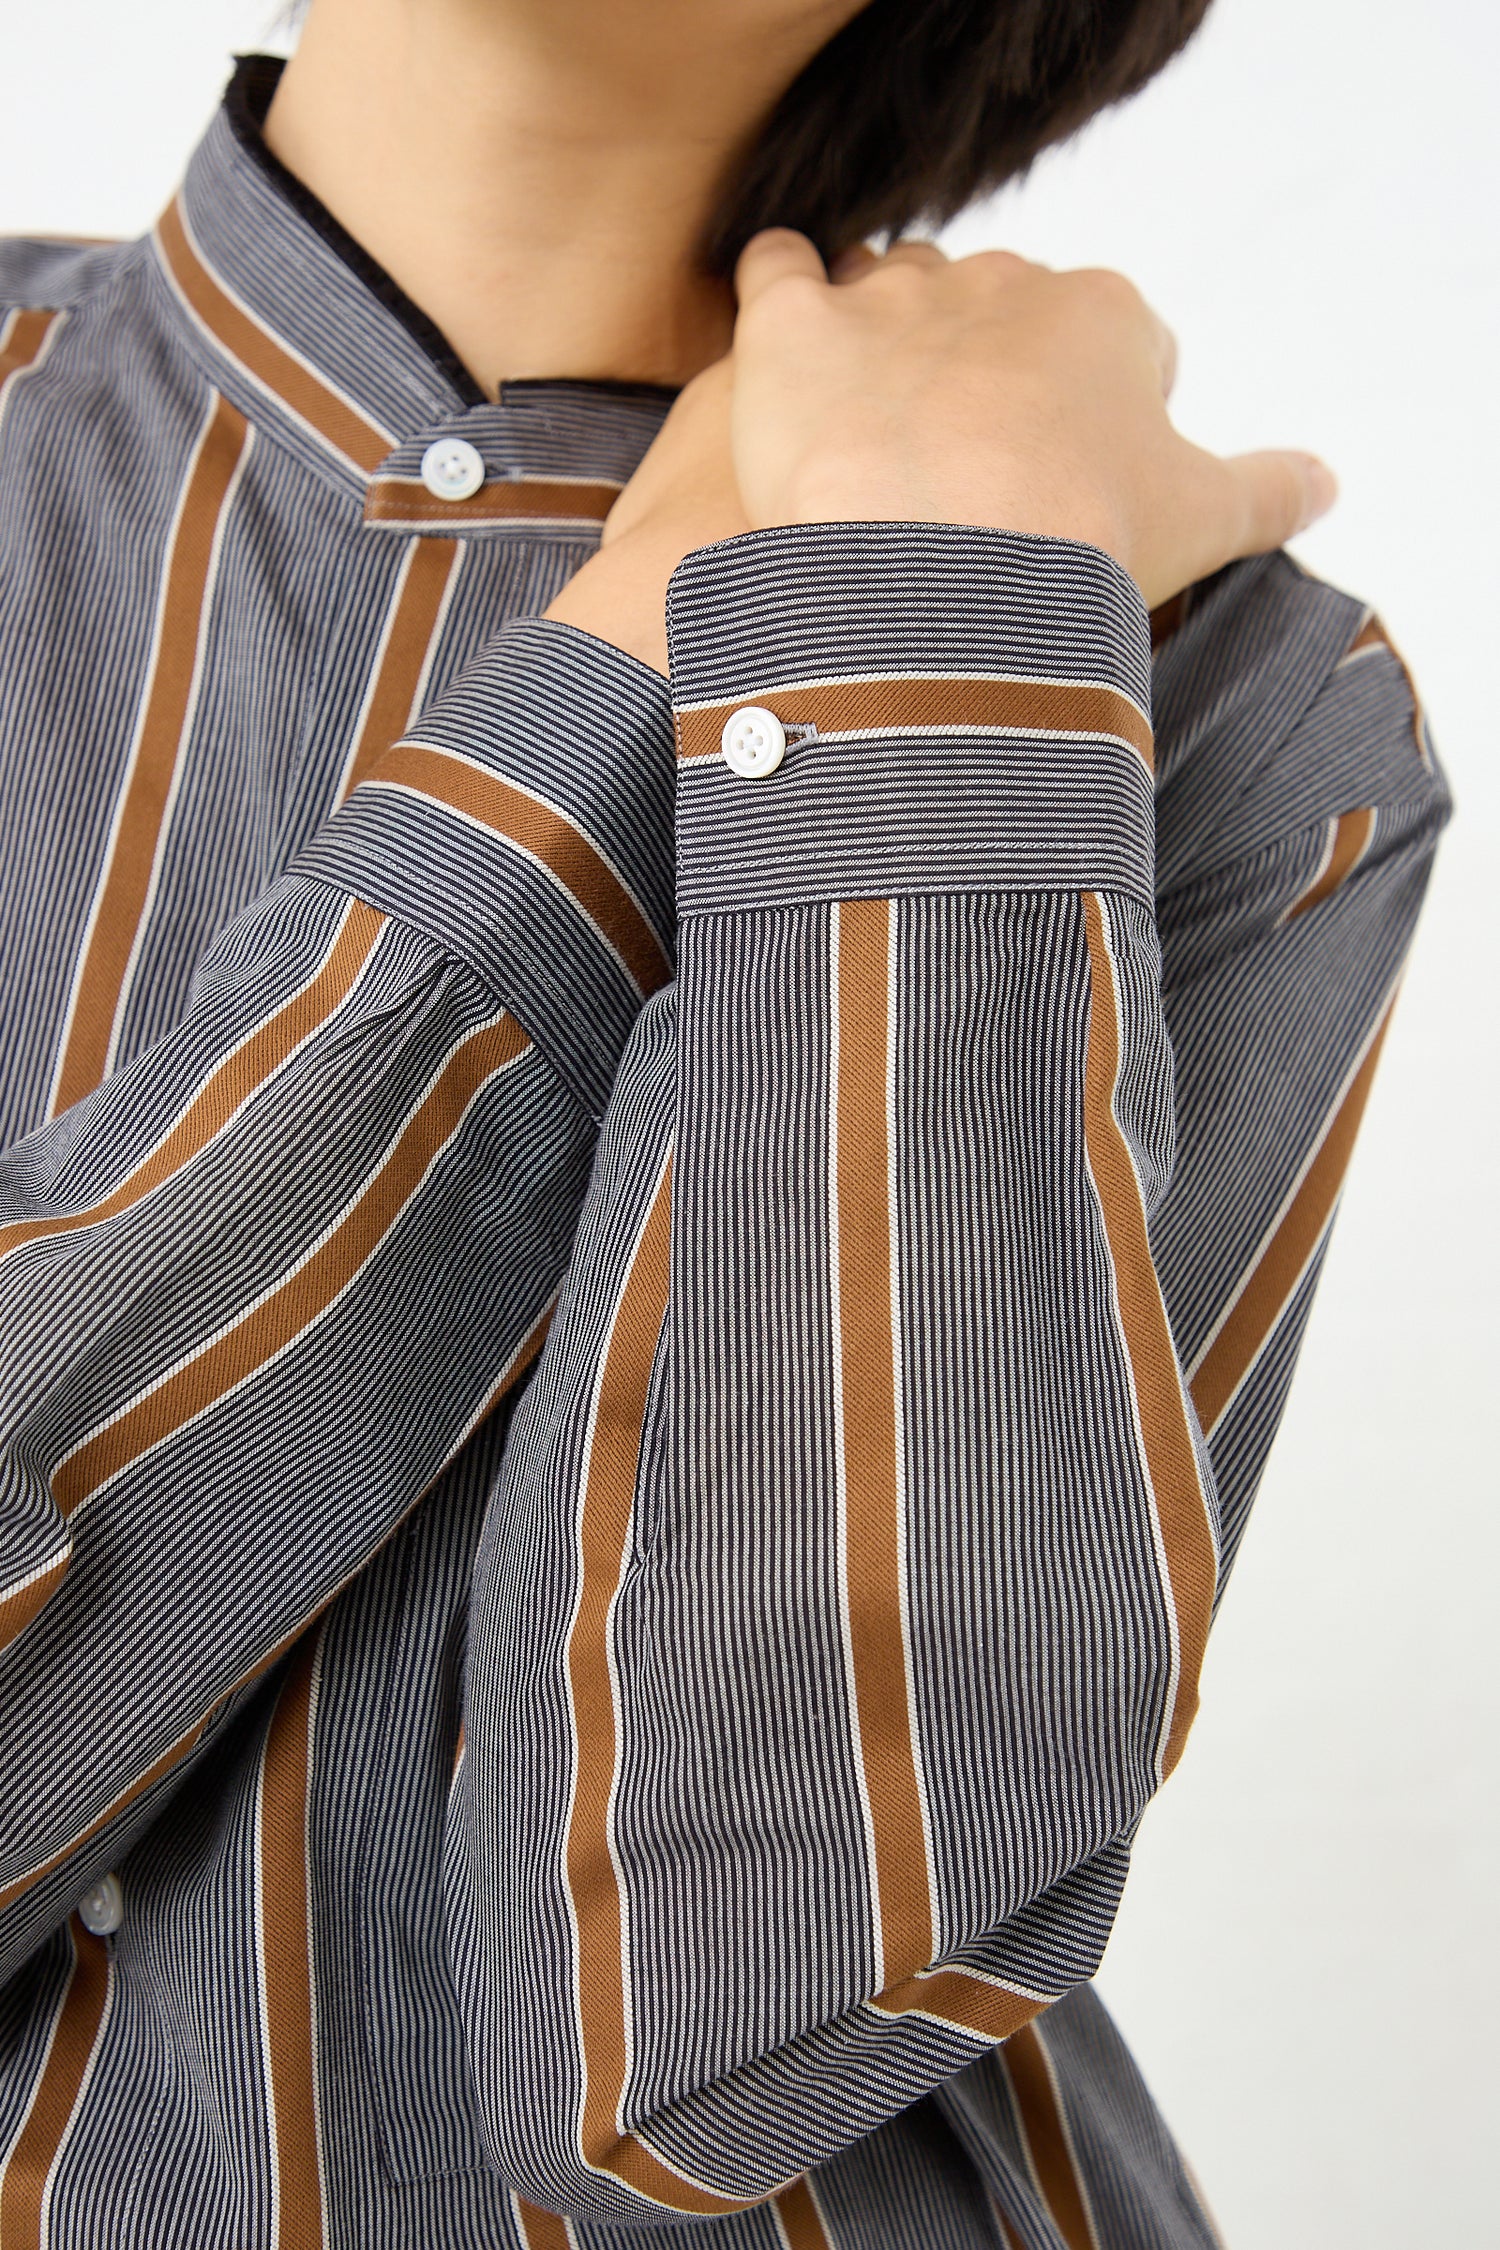 A woman wearing a Cristaseya Mao Shirt with Fringed Collar in Striped Black and Noisette made from Japanese cotton.